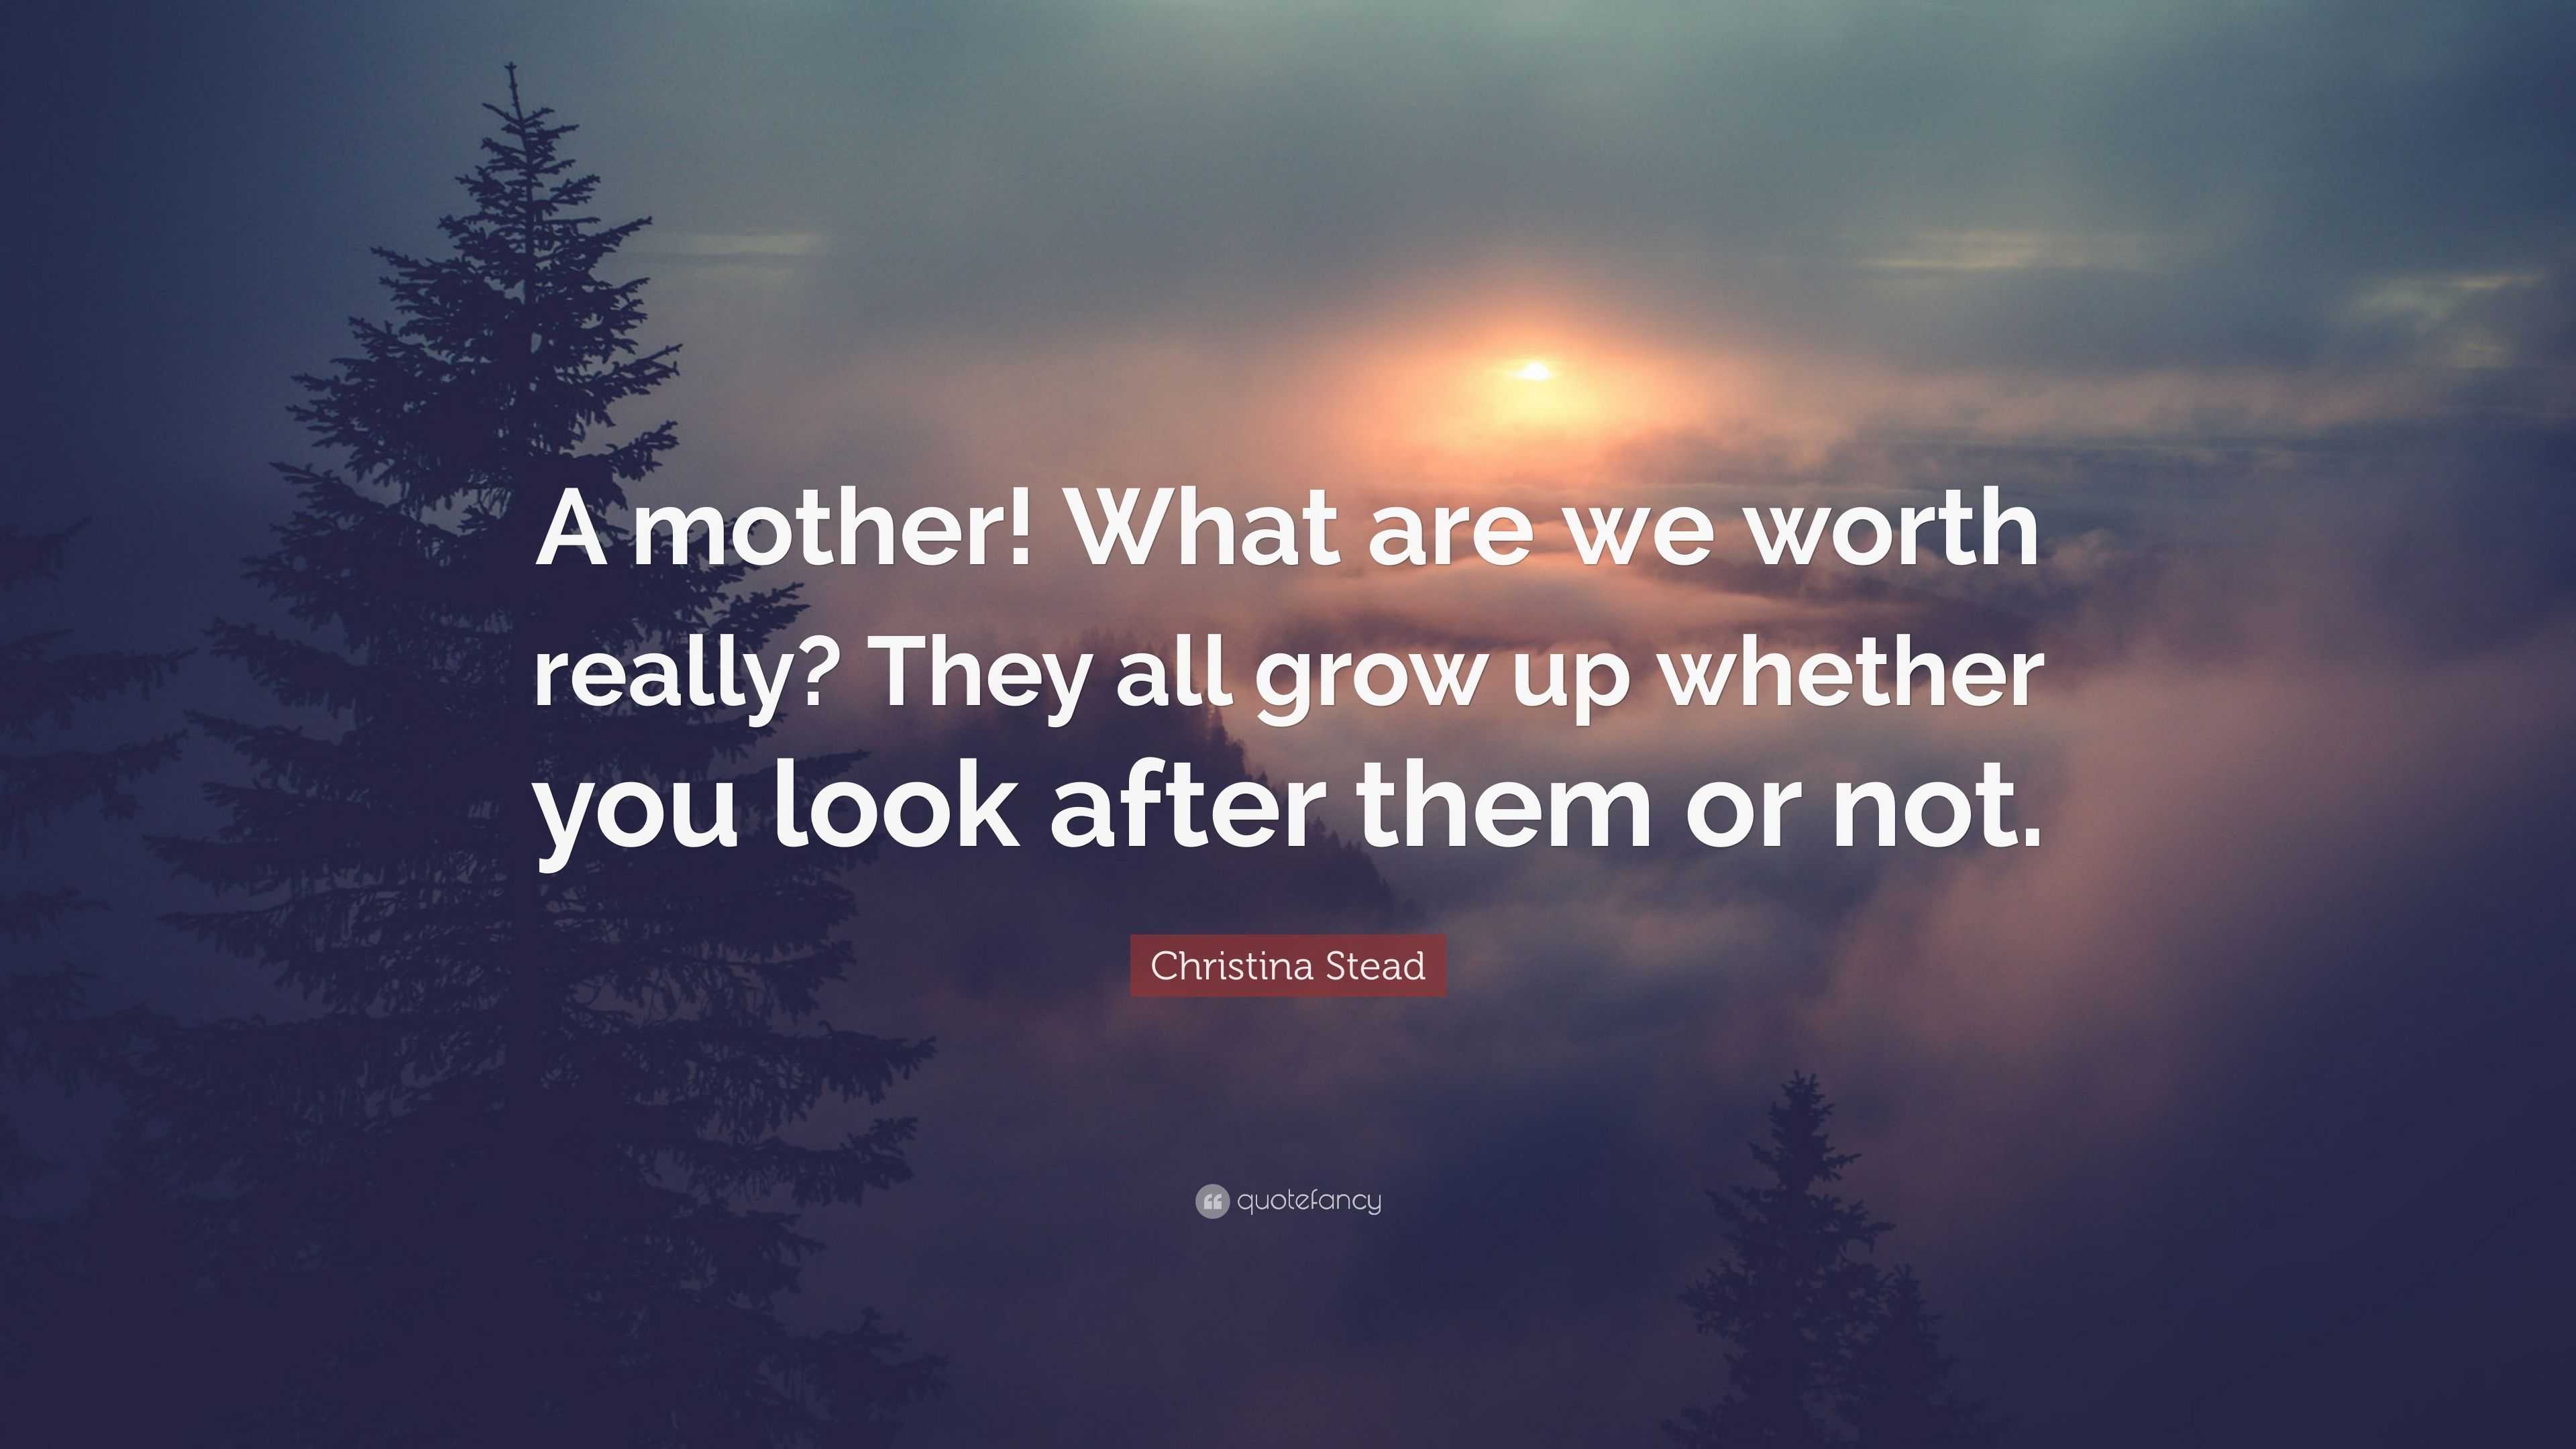 Christina Stead Quote: “A mother! What are we worth really? They all ...